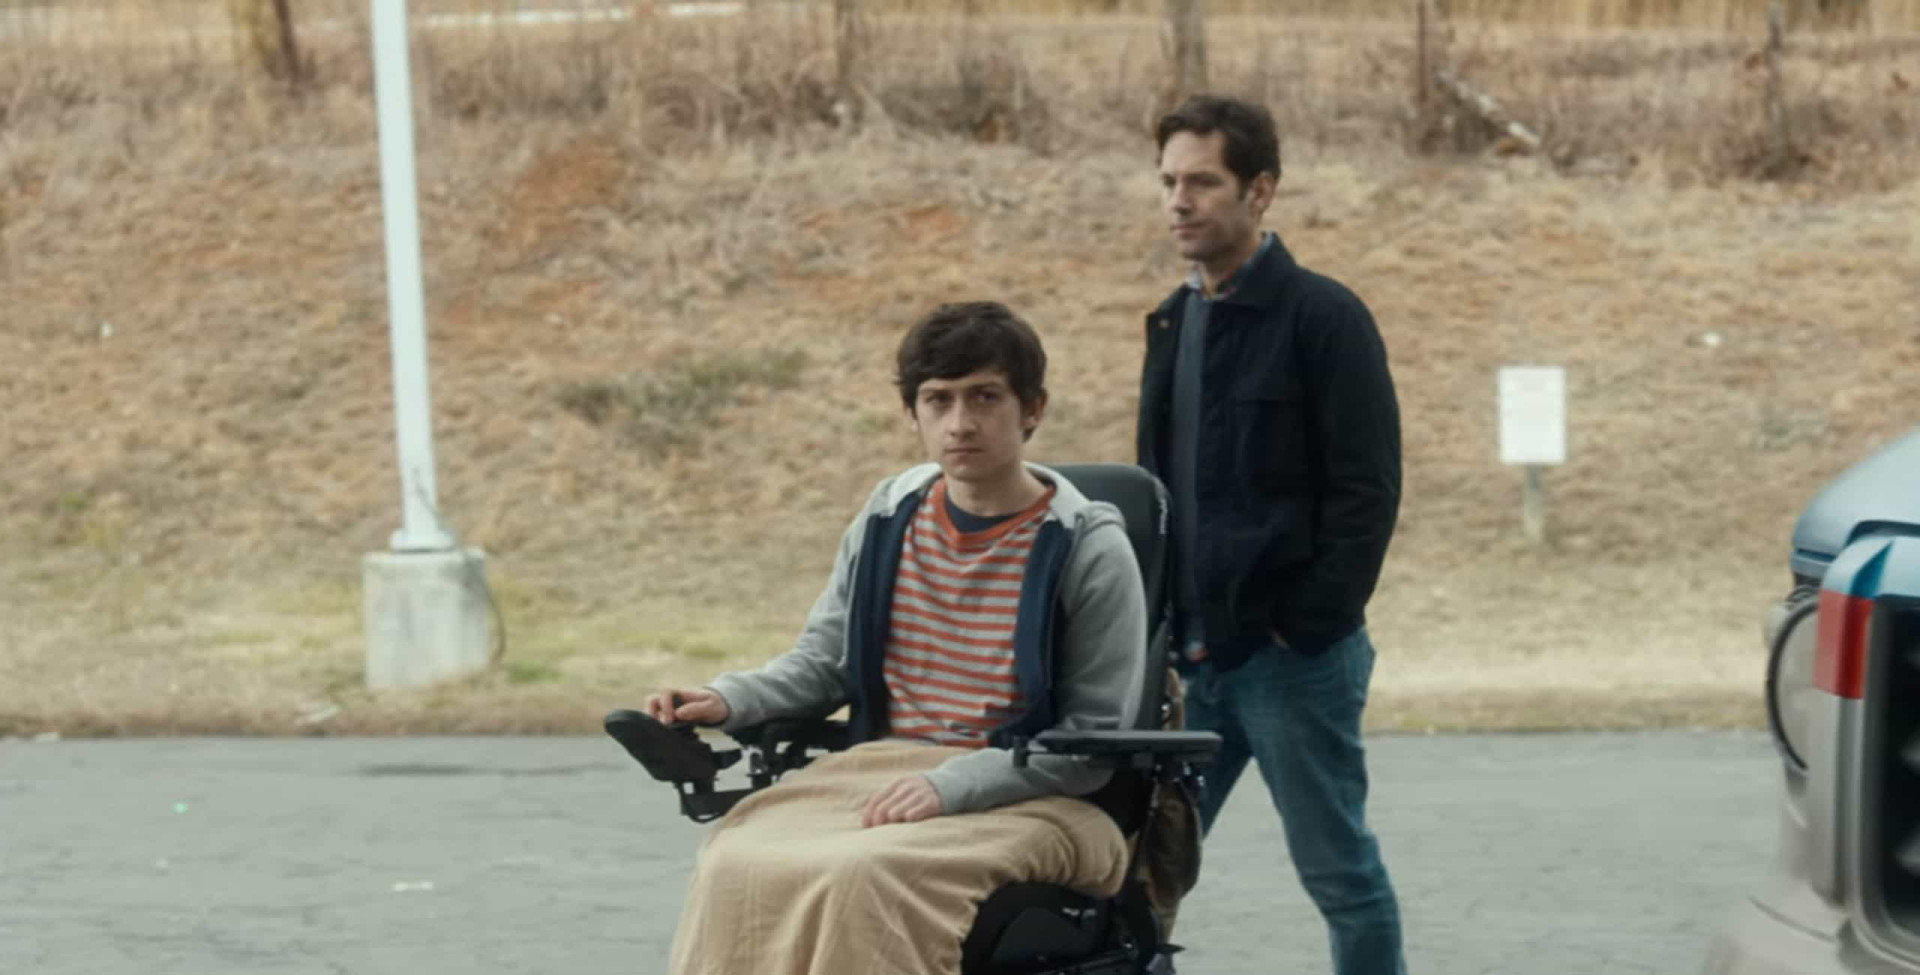 <p>Paul Rudd is a world-weary soul charged with caring for a disabled teenager. When the pair embark on a road trip, they find themselves faced with–and ultimately overcoming–a whole host of emotional challenges.</p><p>You may also like:<a href="https://www.starsinsider.com/n/489188?utm_source=msn.com&utm_medium=display&utm_campaign=referral_description&utm_content=481087v5en-us"> The most requested music for funerals</a></p>